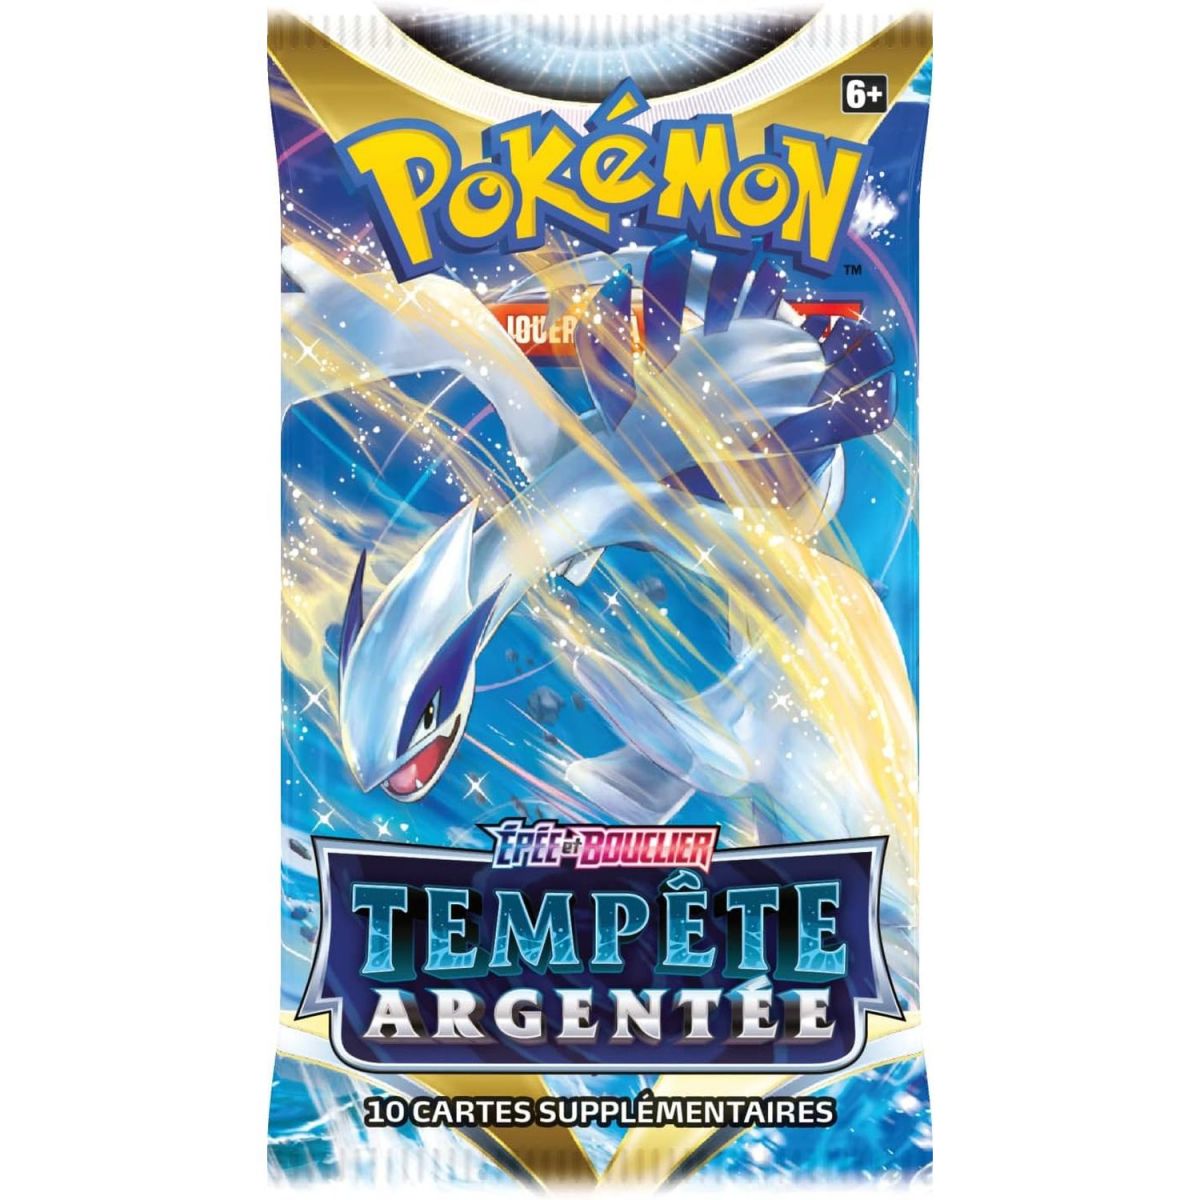 Pokémon - Boosters - Sword and Shield: Silver Storm [EB12] - FR